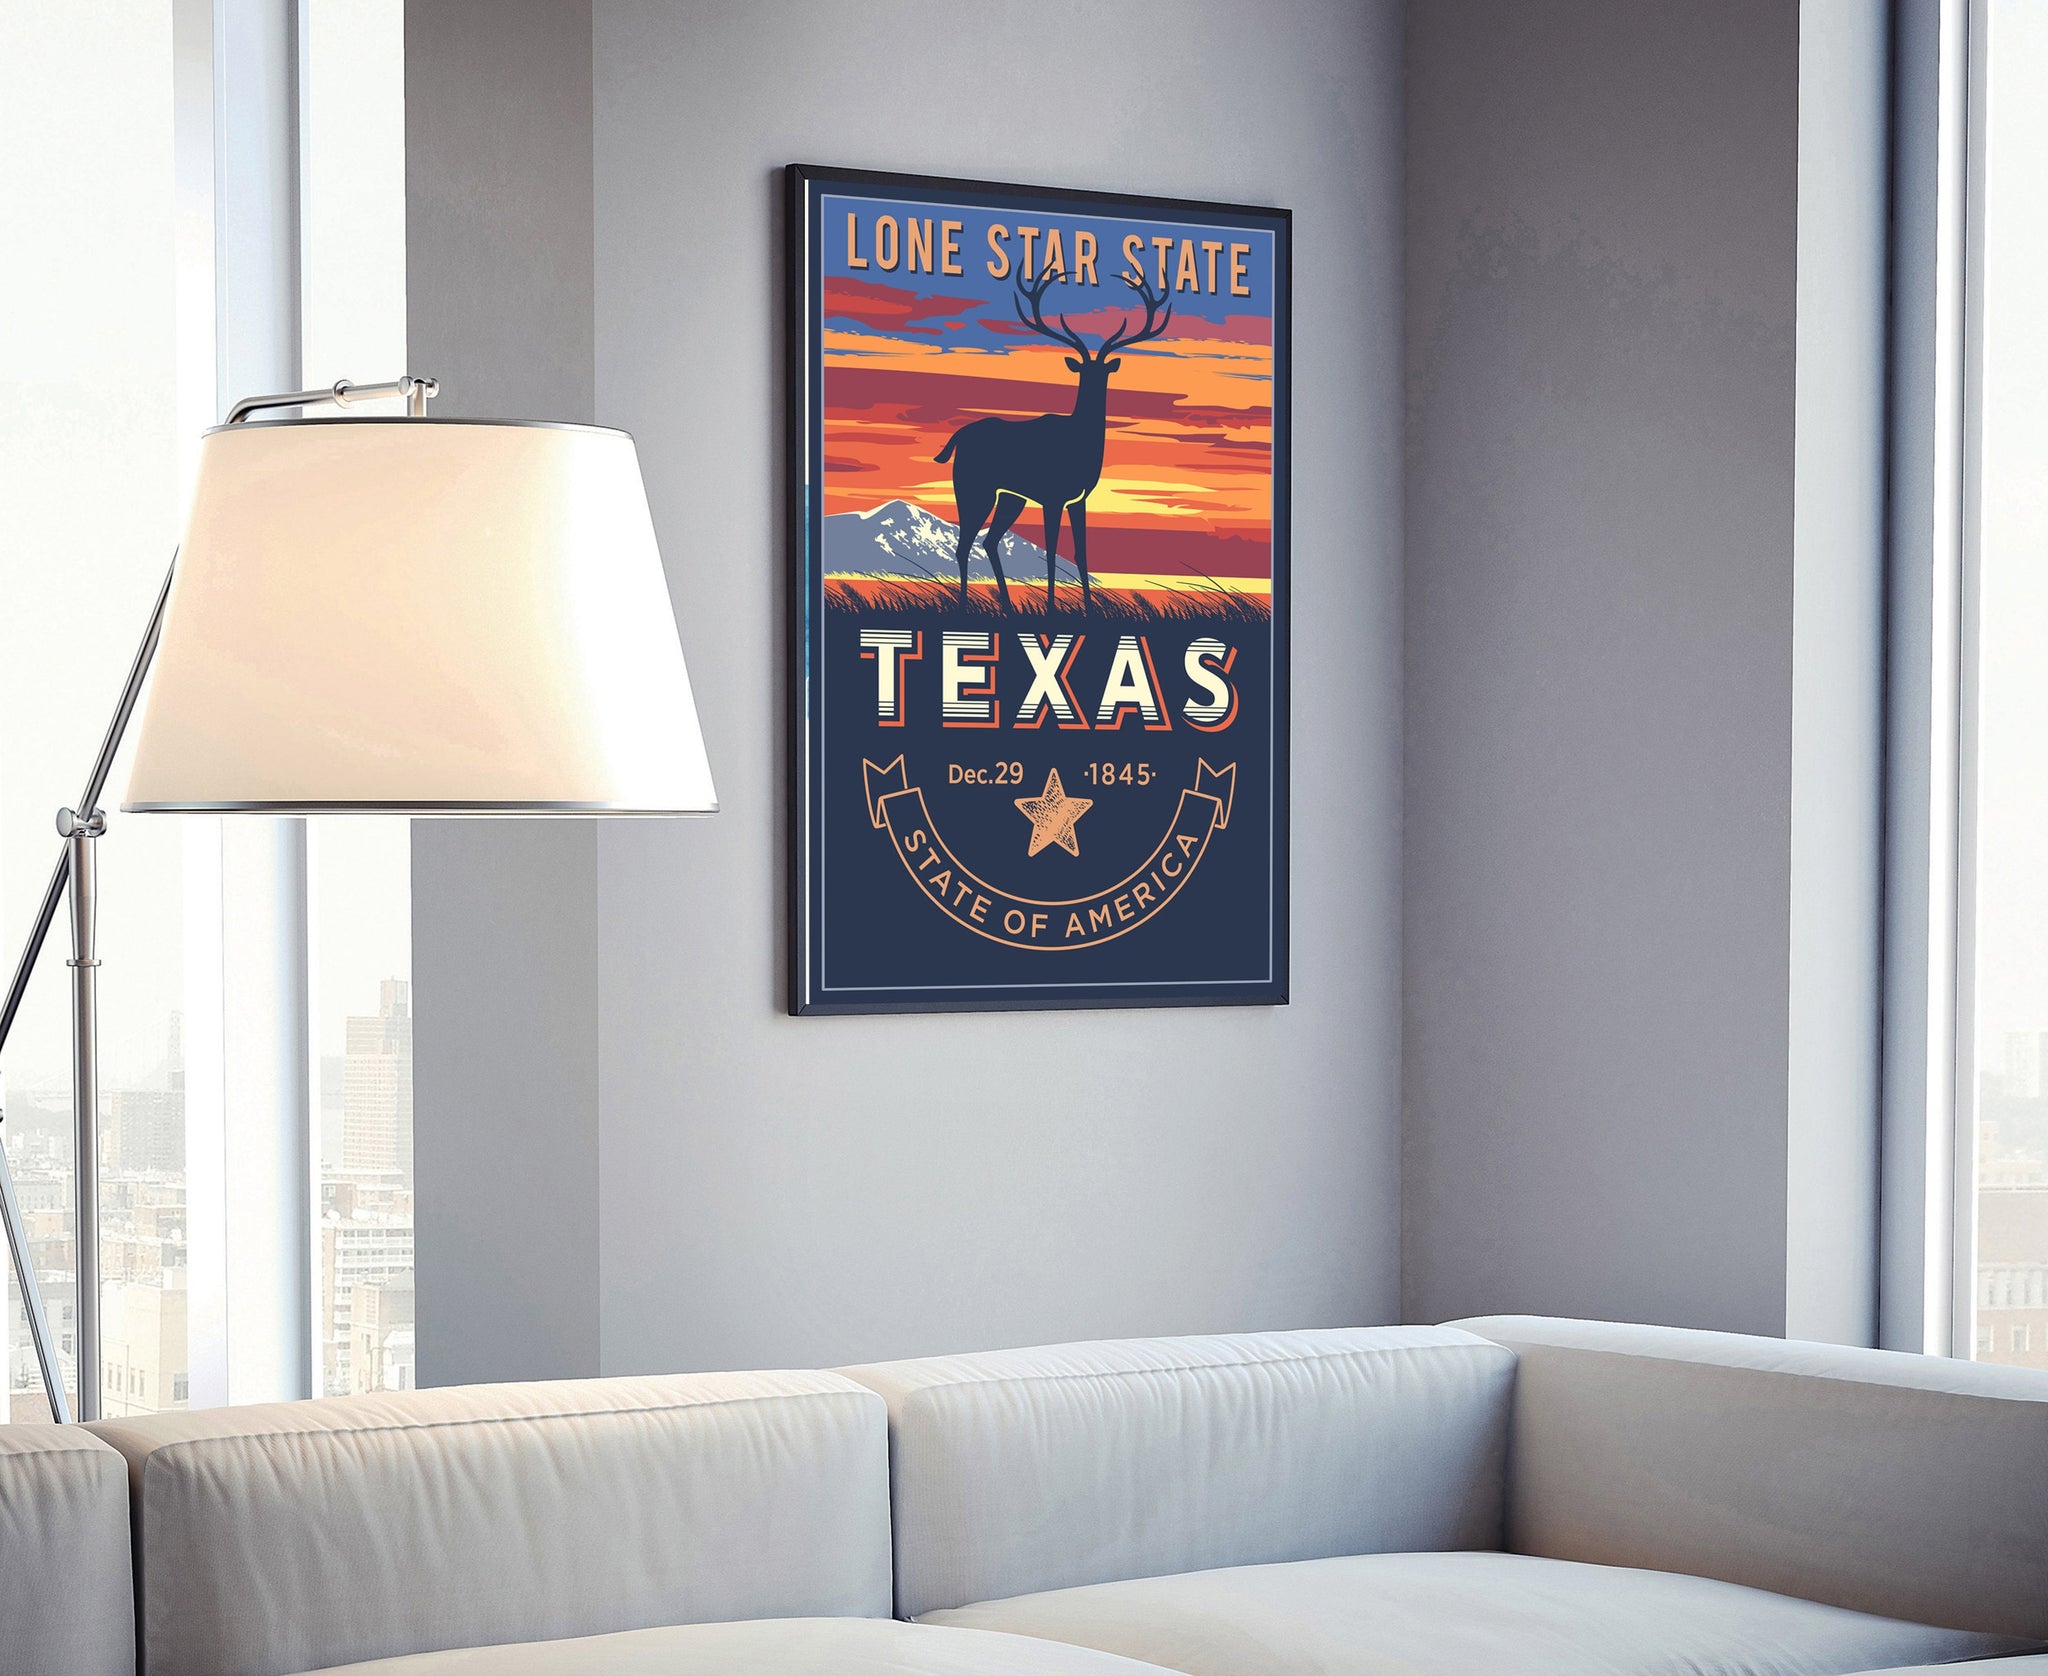 United States Poster, Texas State Poster Print, Texas State Emblem Poster, Retro Travel State Poster, Home Wall Art, Office Wall Art